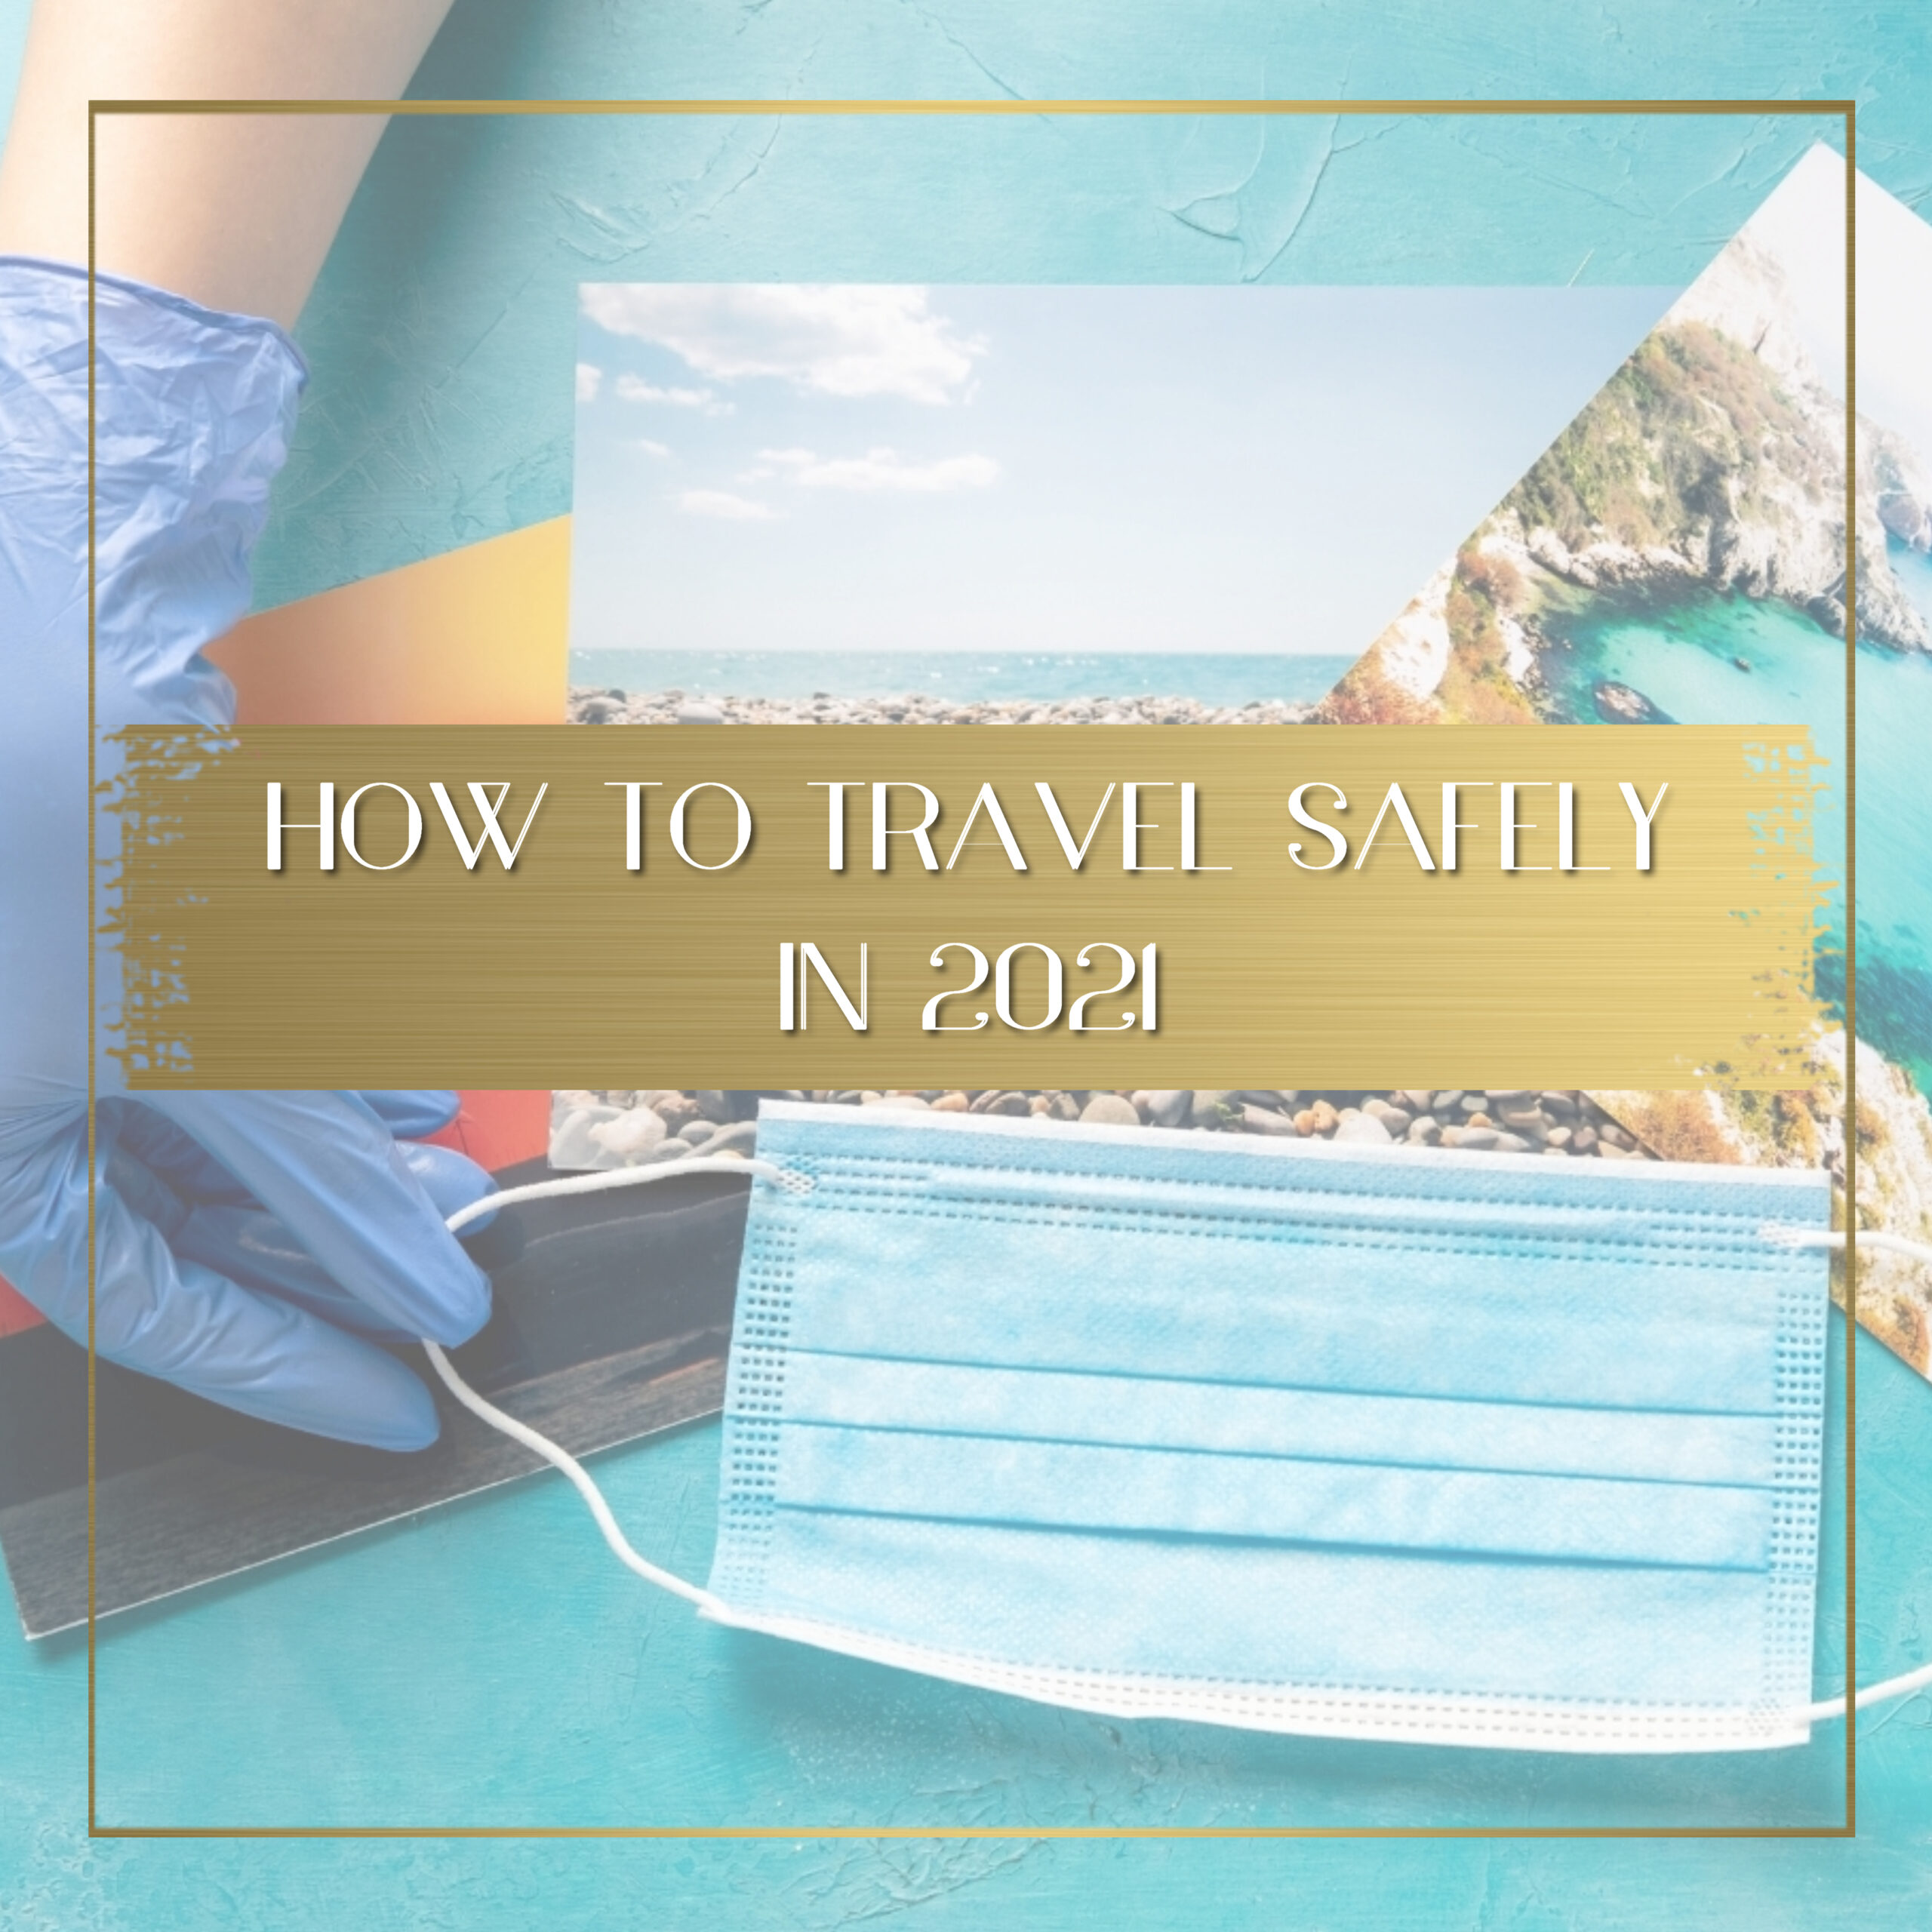 How to travel safely in 2021 feature